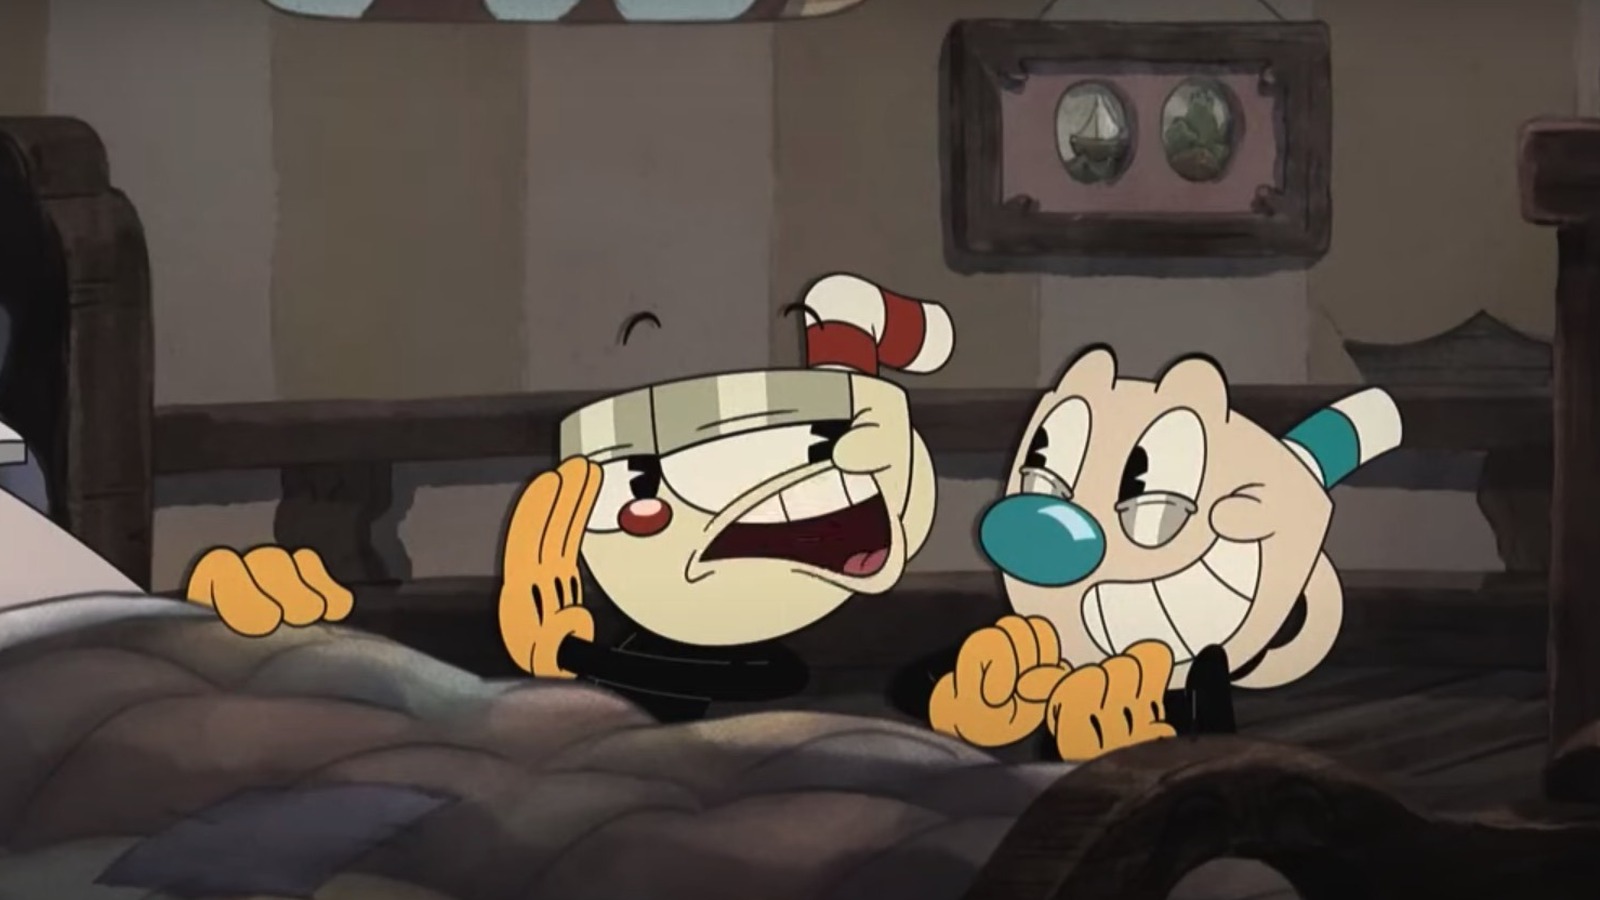 The Cuphead Show! gets a season 2 trailer from Netflix